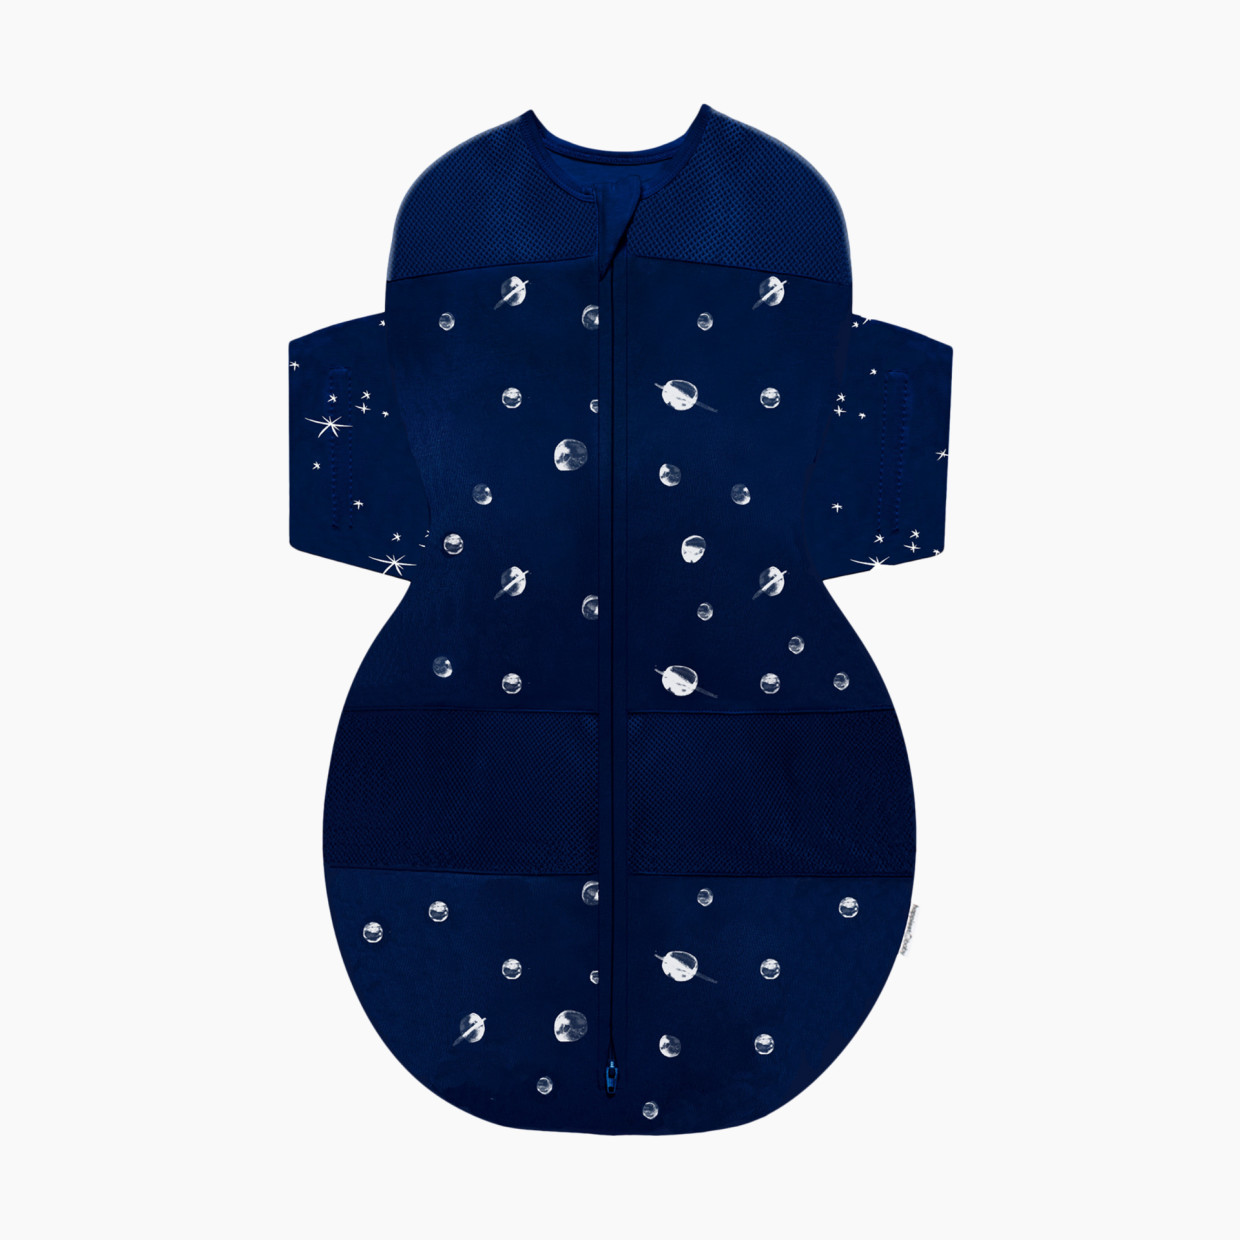 Happiest Baby Snoo Sack - Midnight Planets, Small.